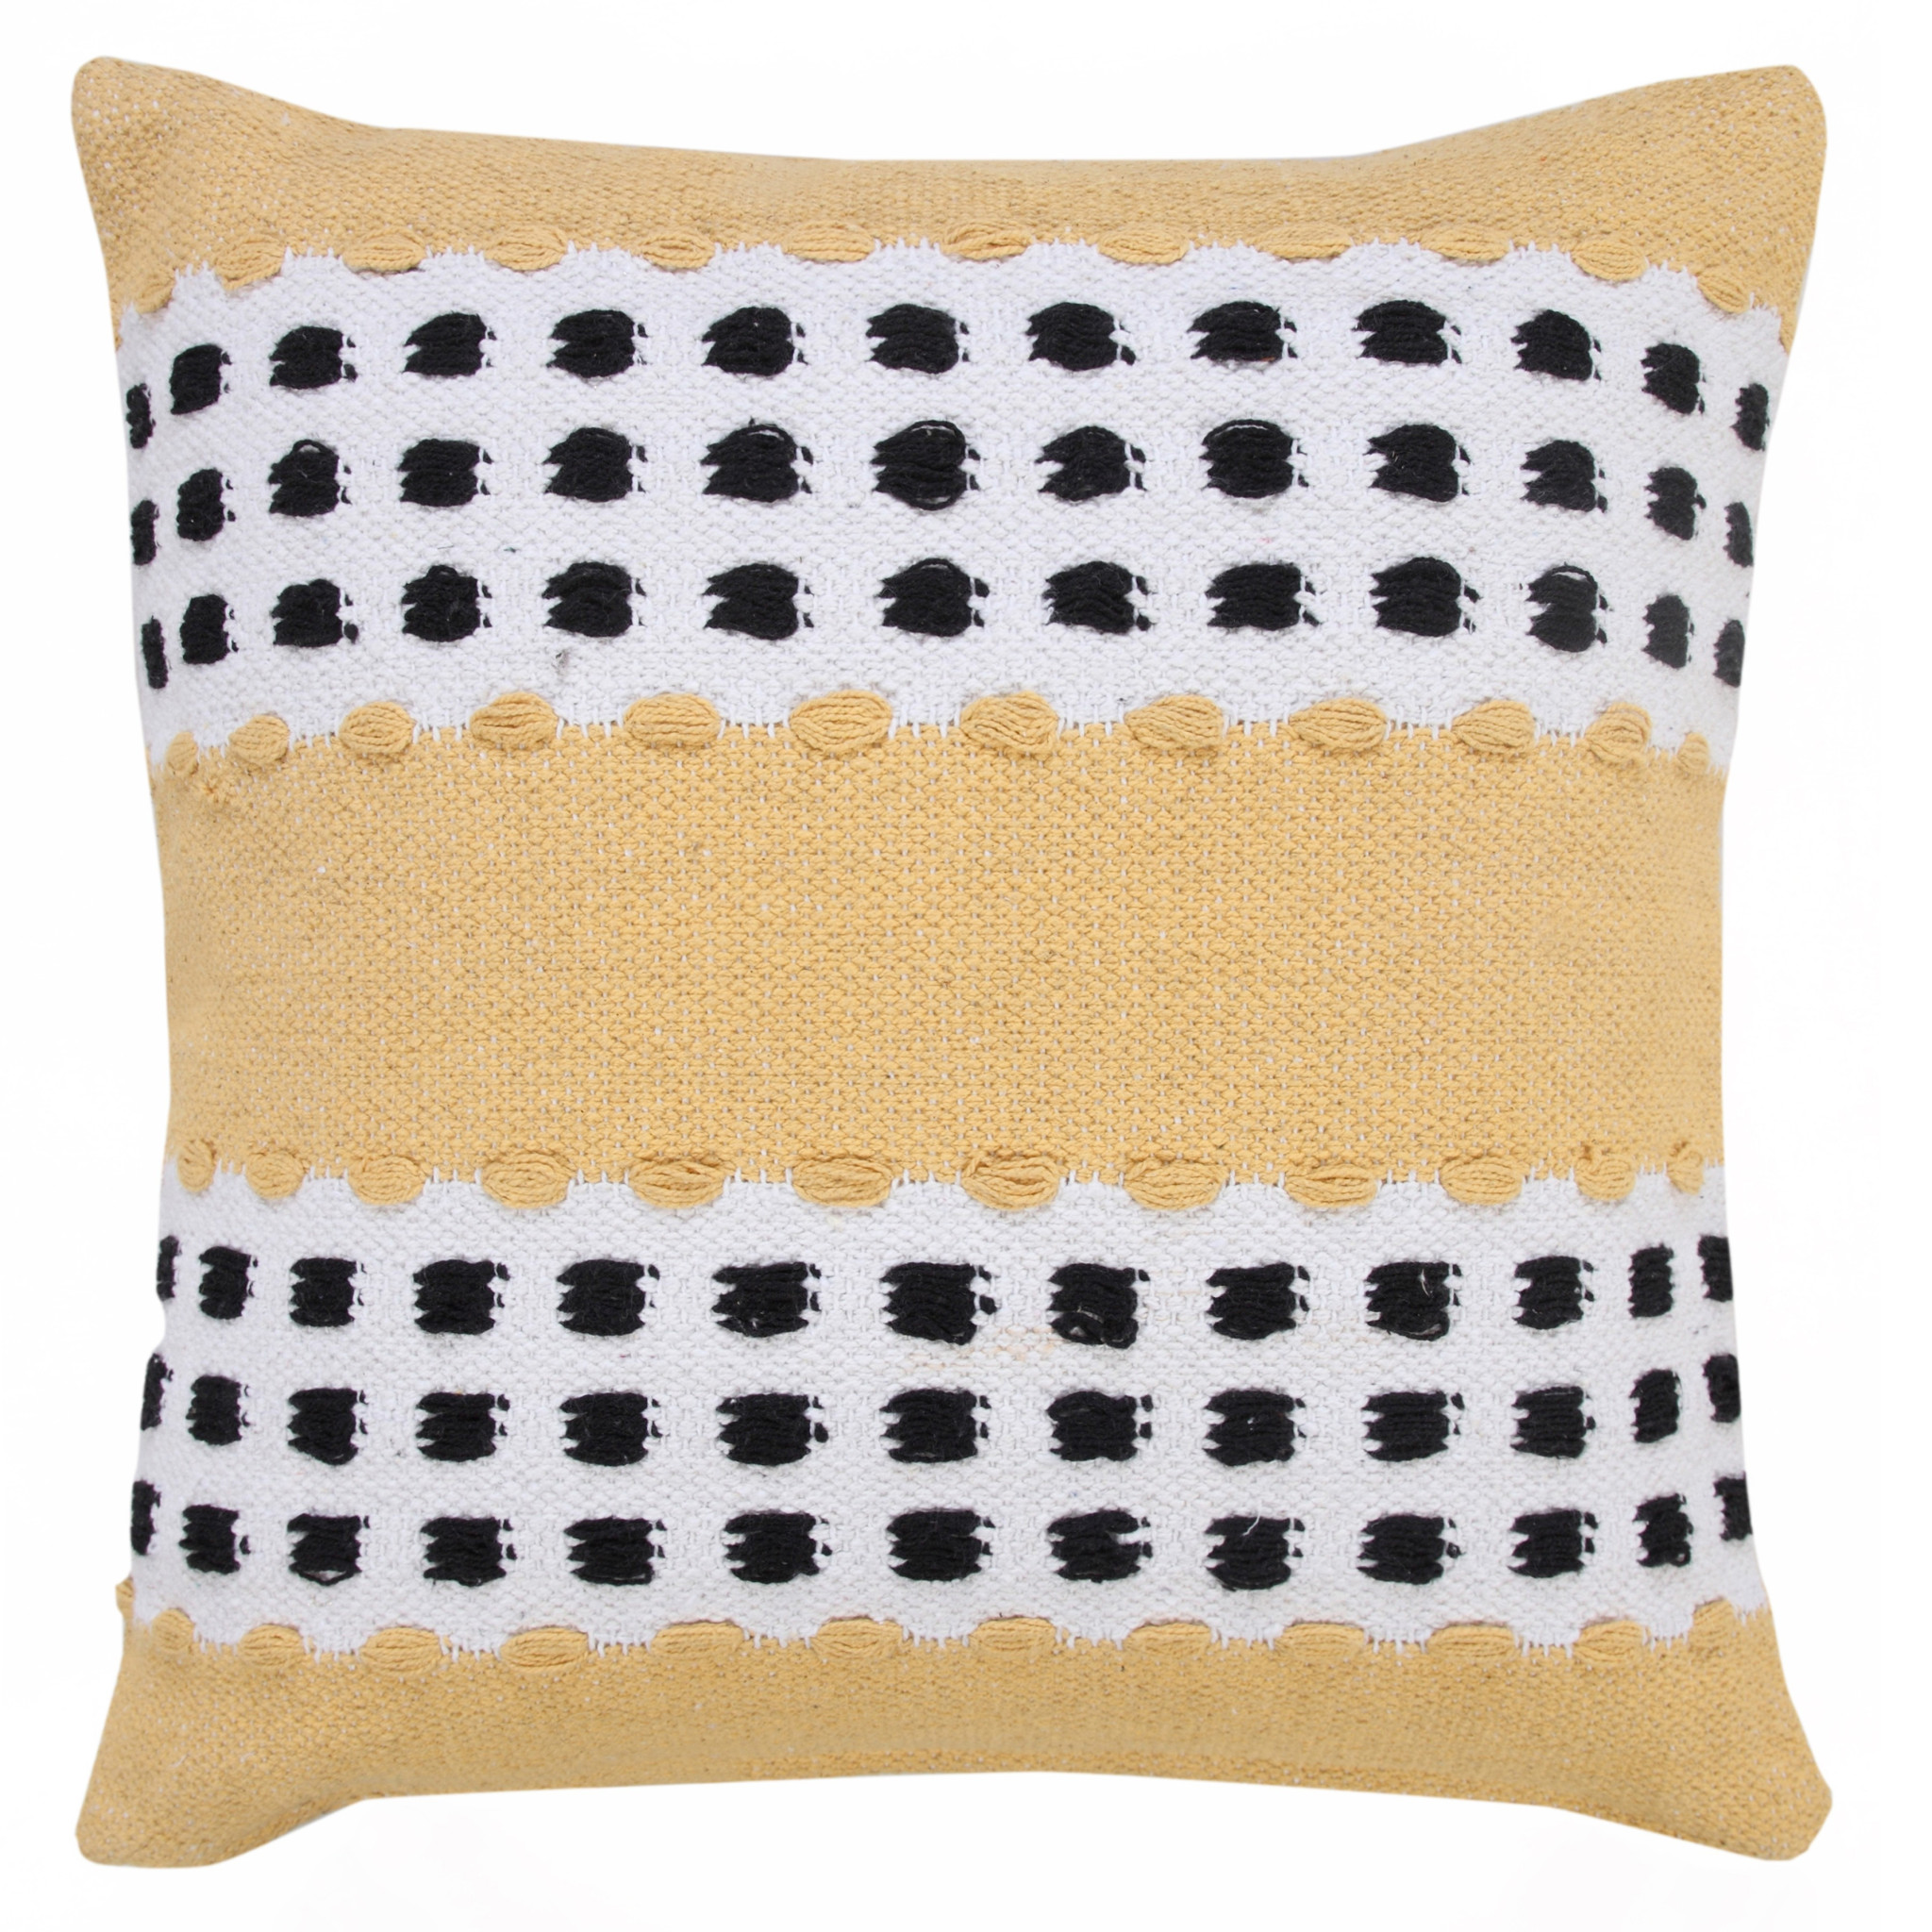 20" X 20" Yellow Black And White 100% Cotton Striped Zippered Pillow-516951-1